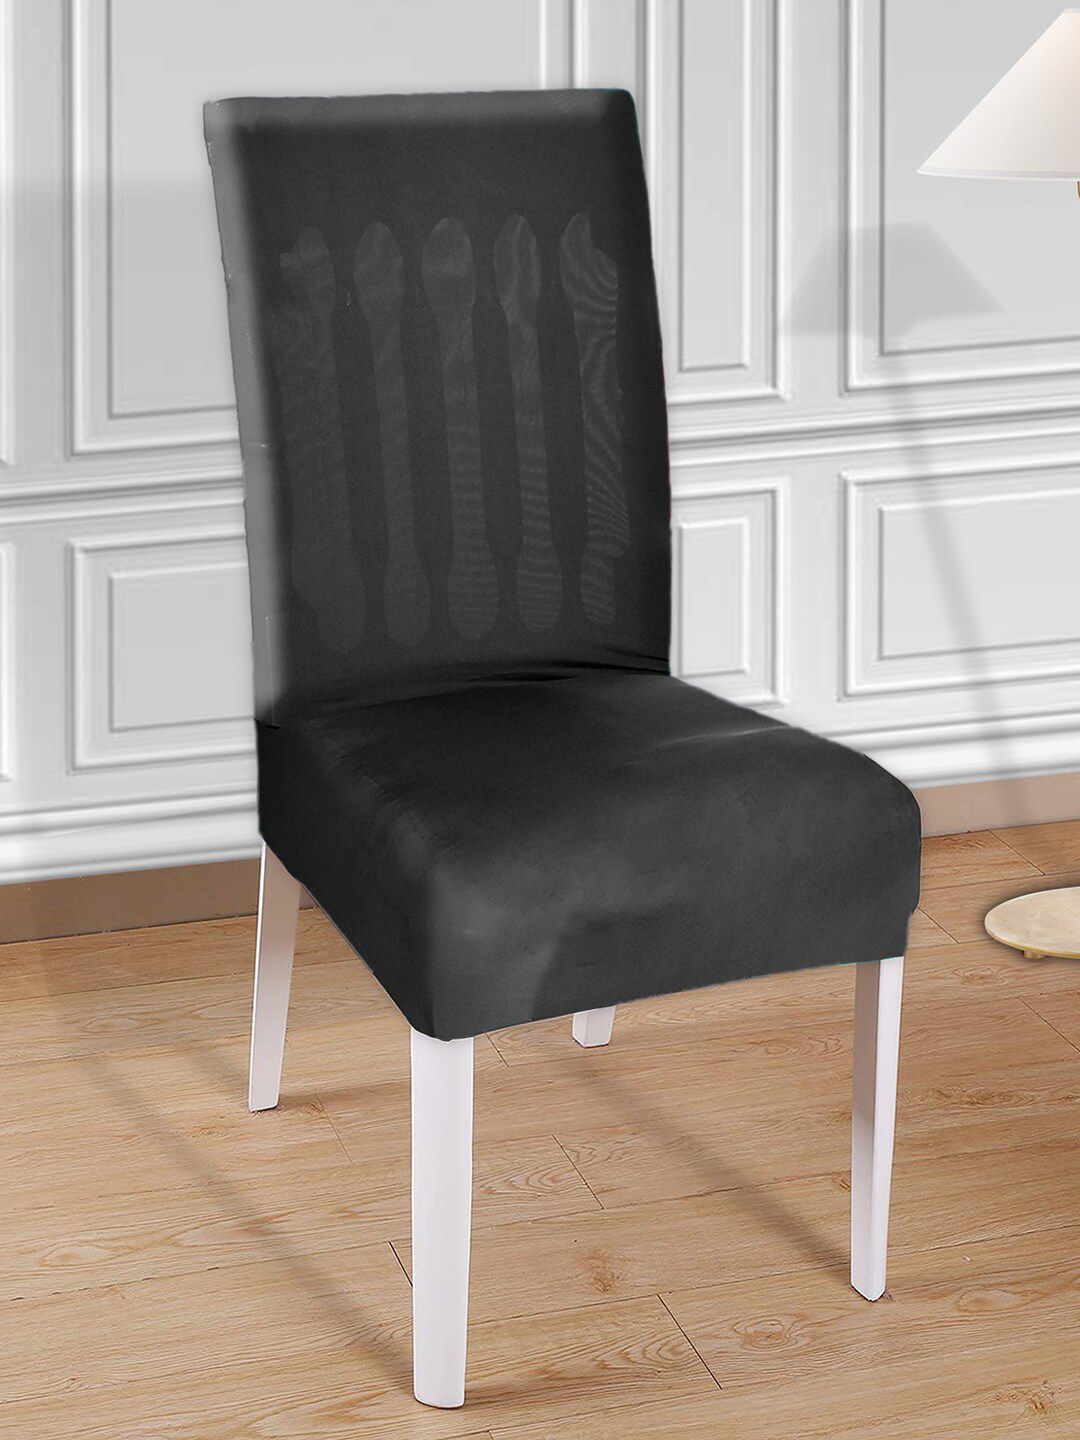 Kuber Industries Black Solid Elastic Stretchable Chair Cover Price in India